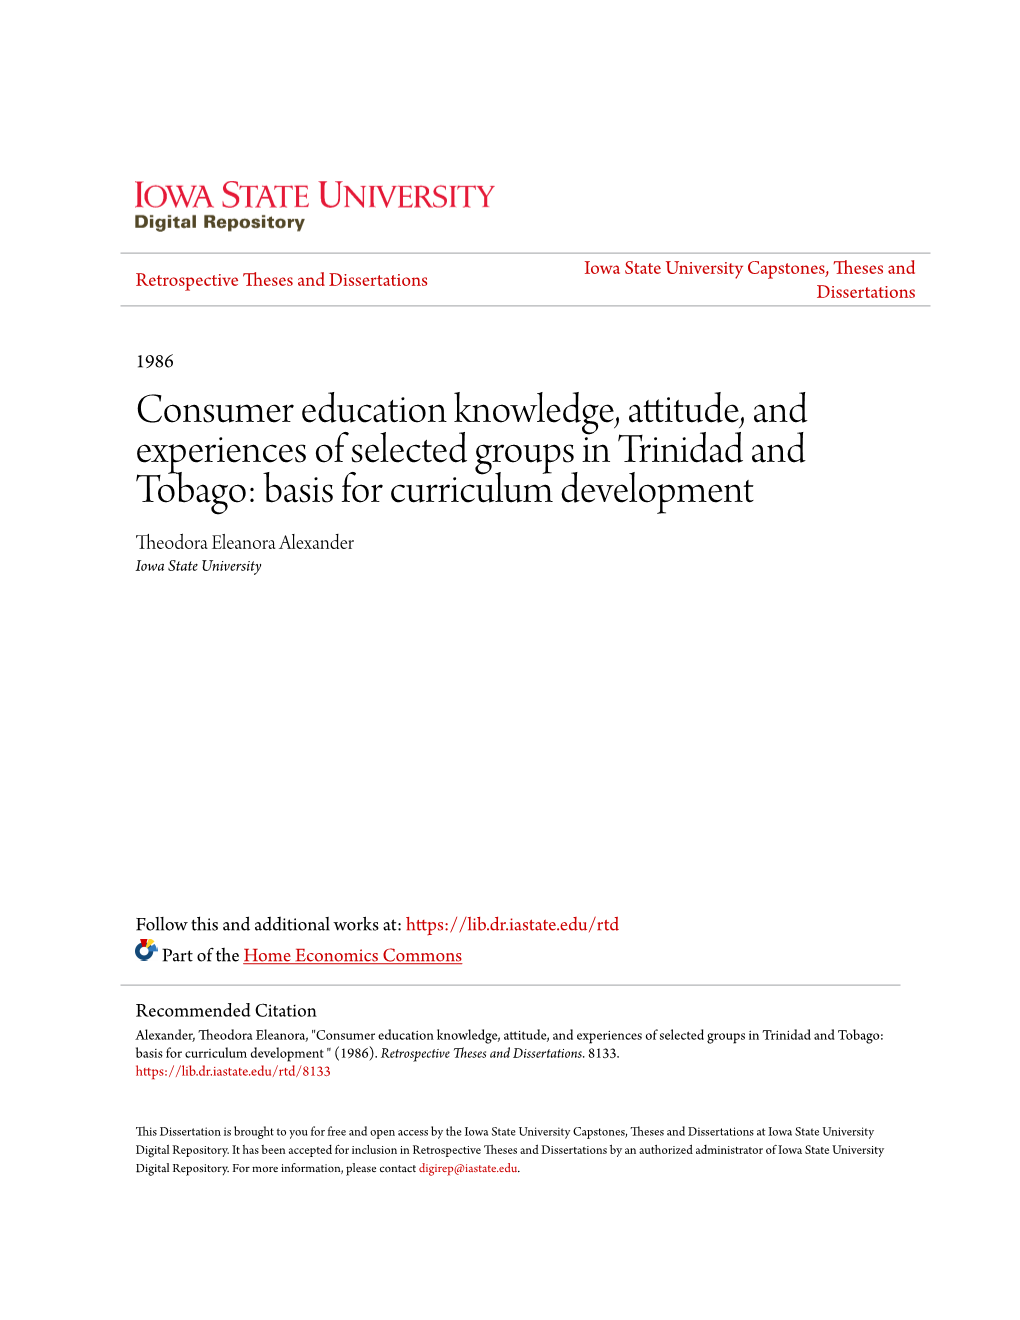 Consumer Education Knowledge, Attitude, and Experiences Of